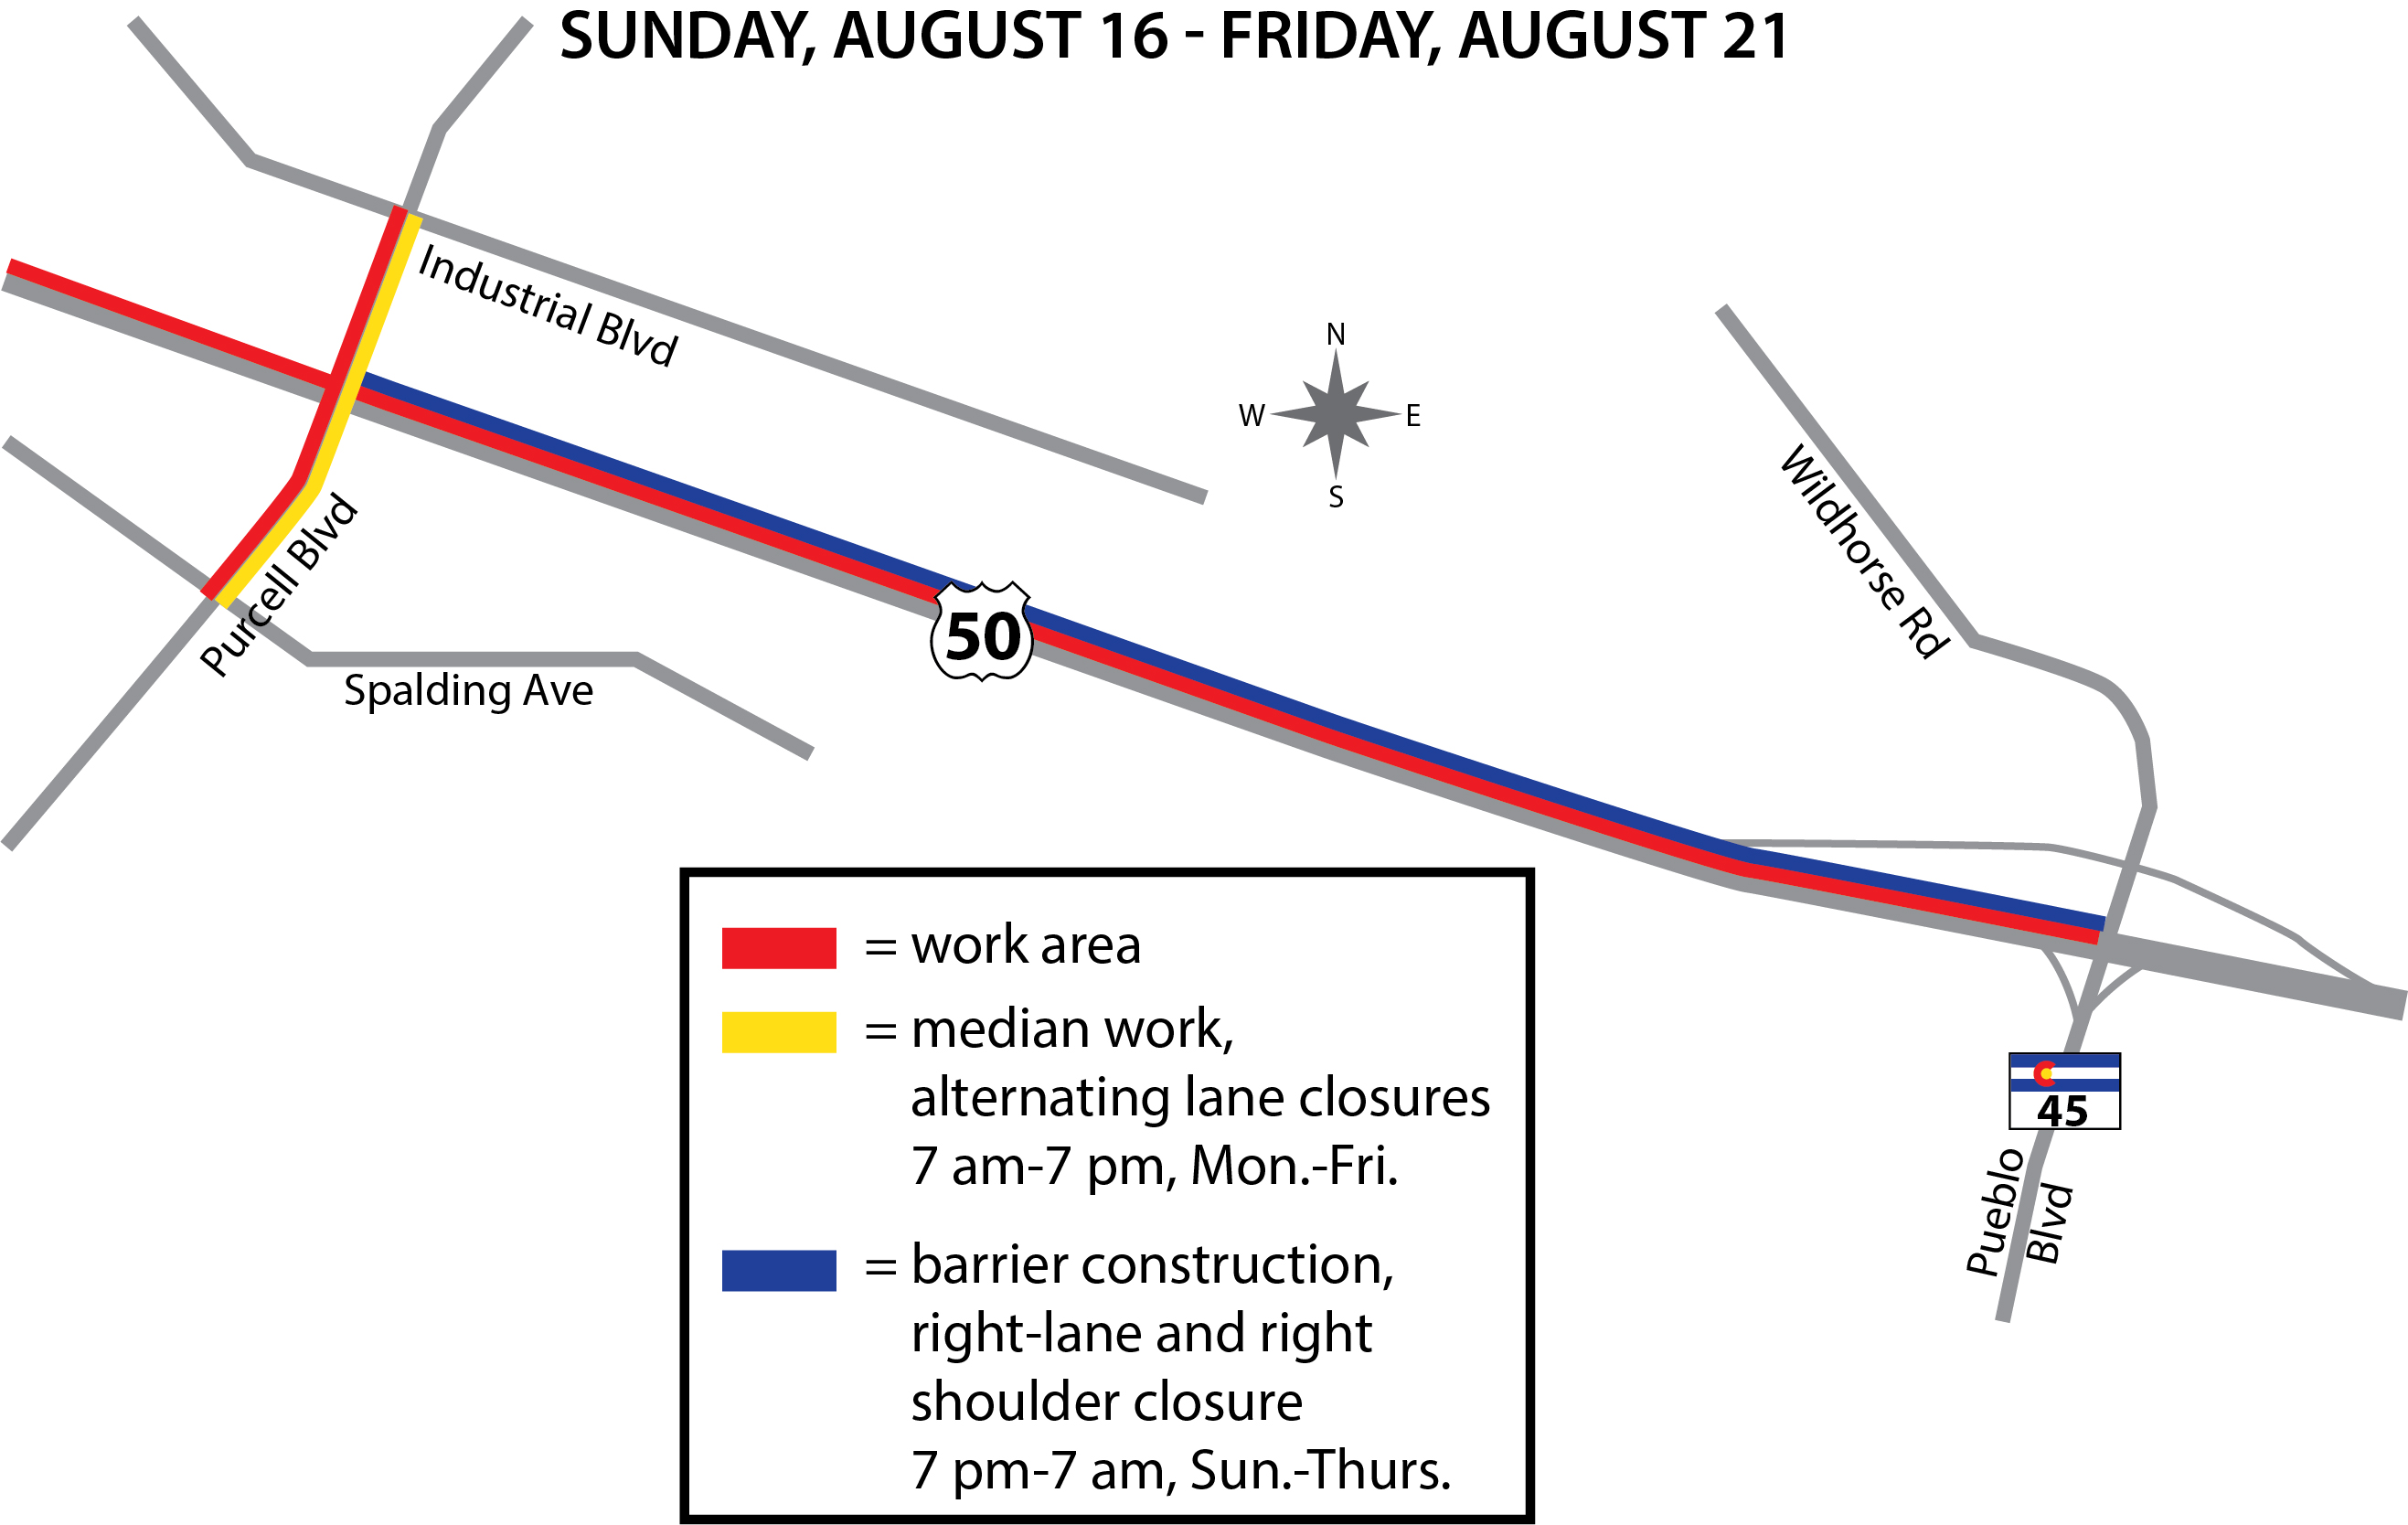 US 50 Purcell TrafficAdv map Aug16.jpg detail image